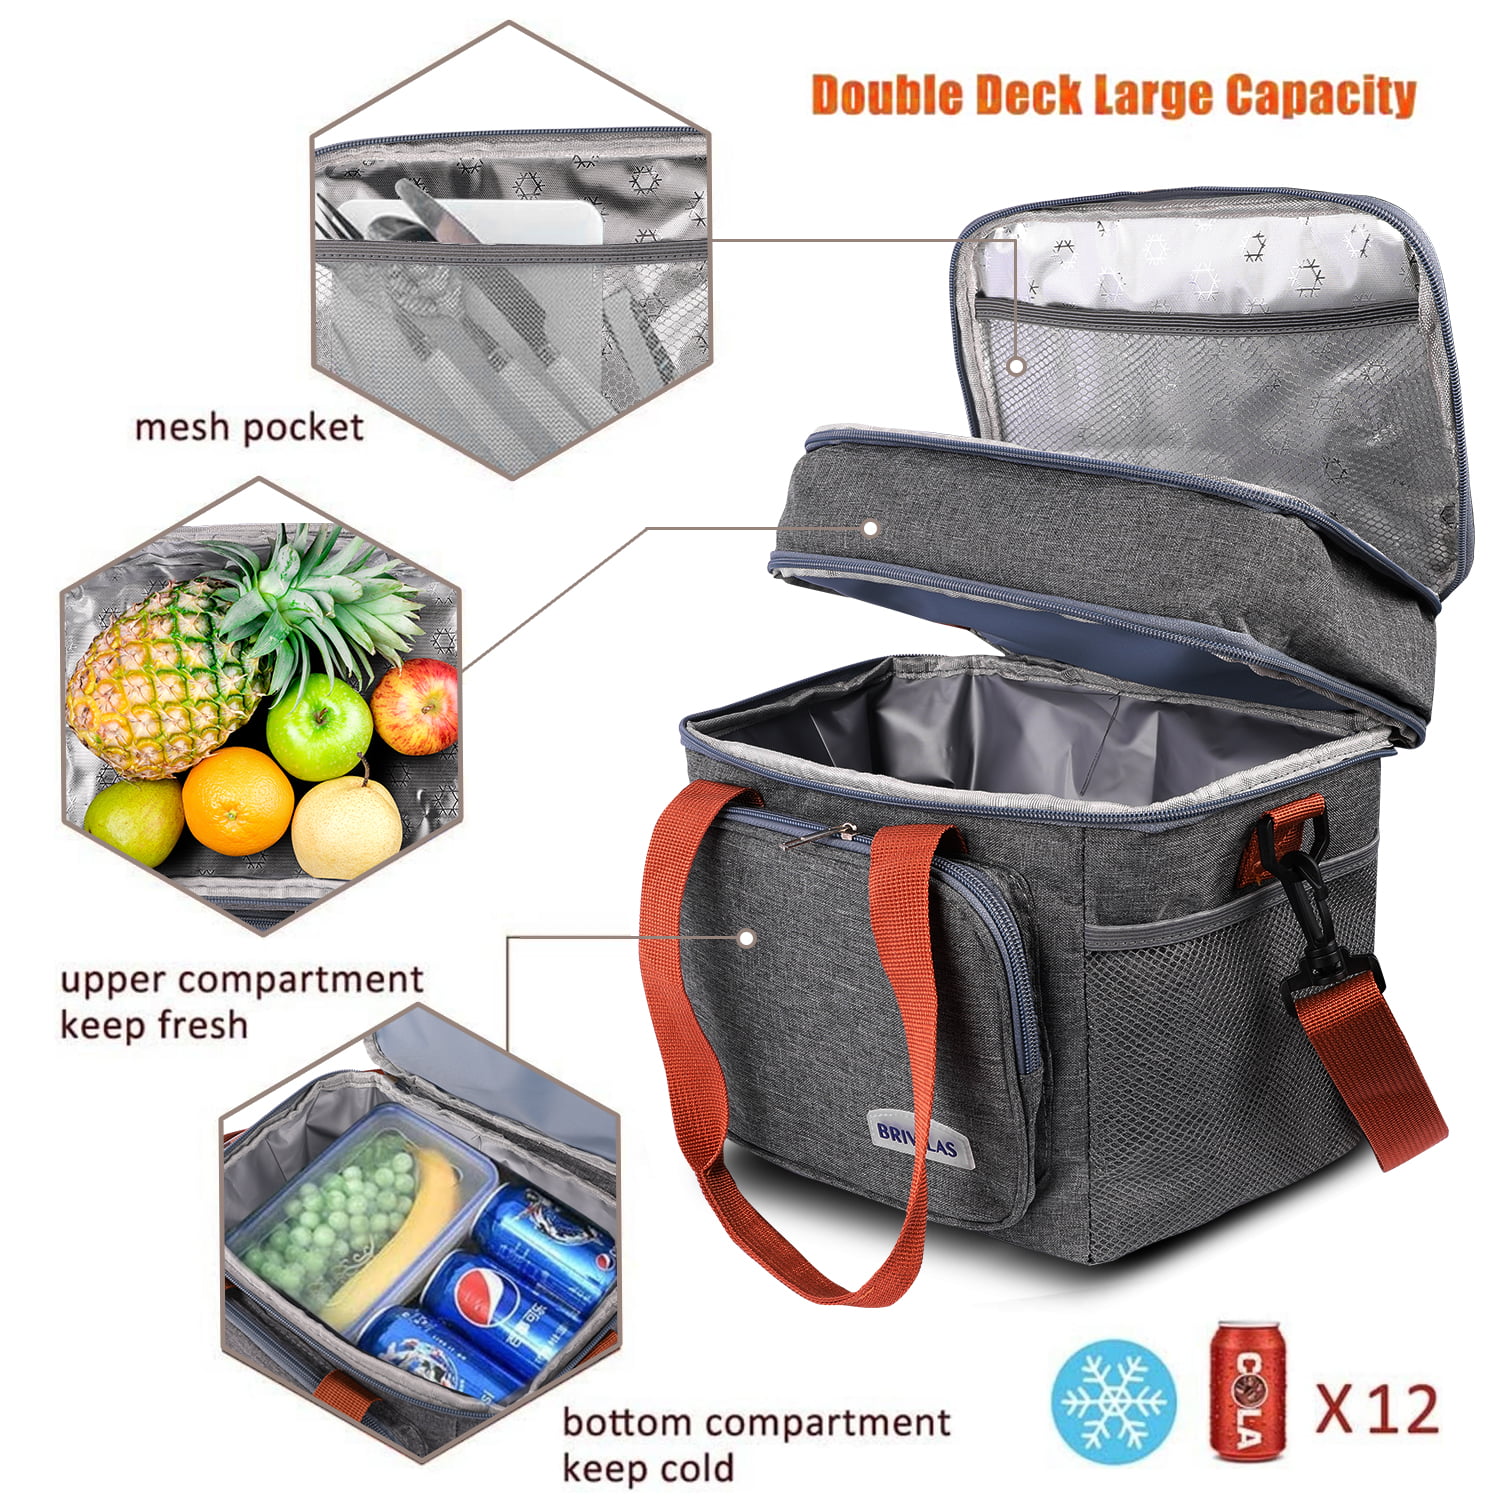 Lava Lunch Double Deck Insulated Grey Lunch Box Bag Hot Food For 5